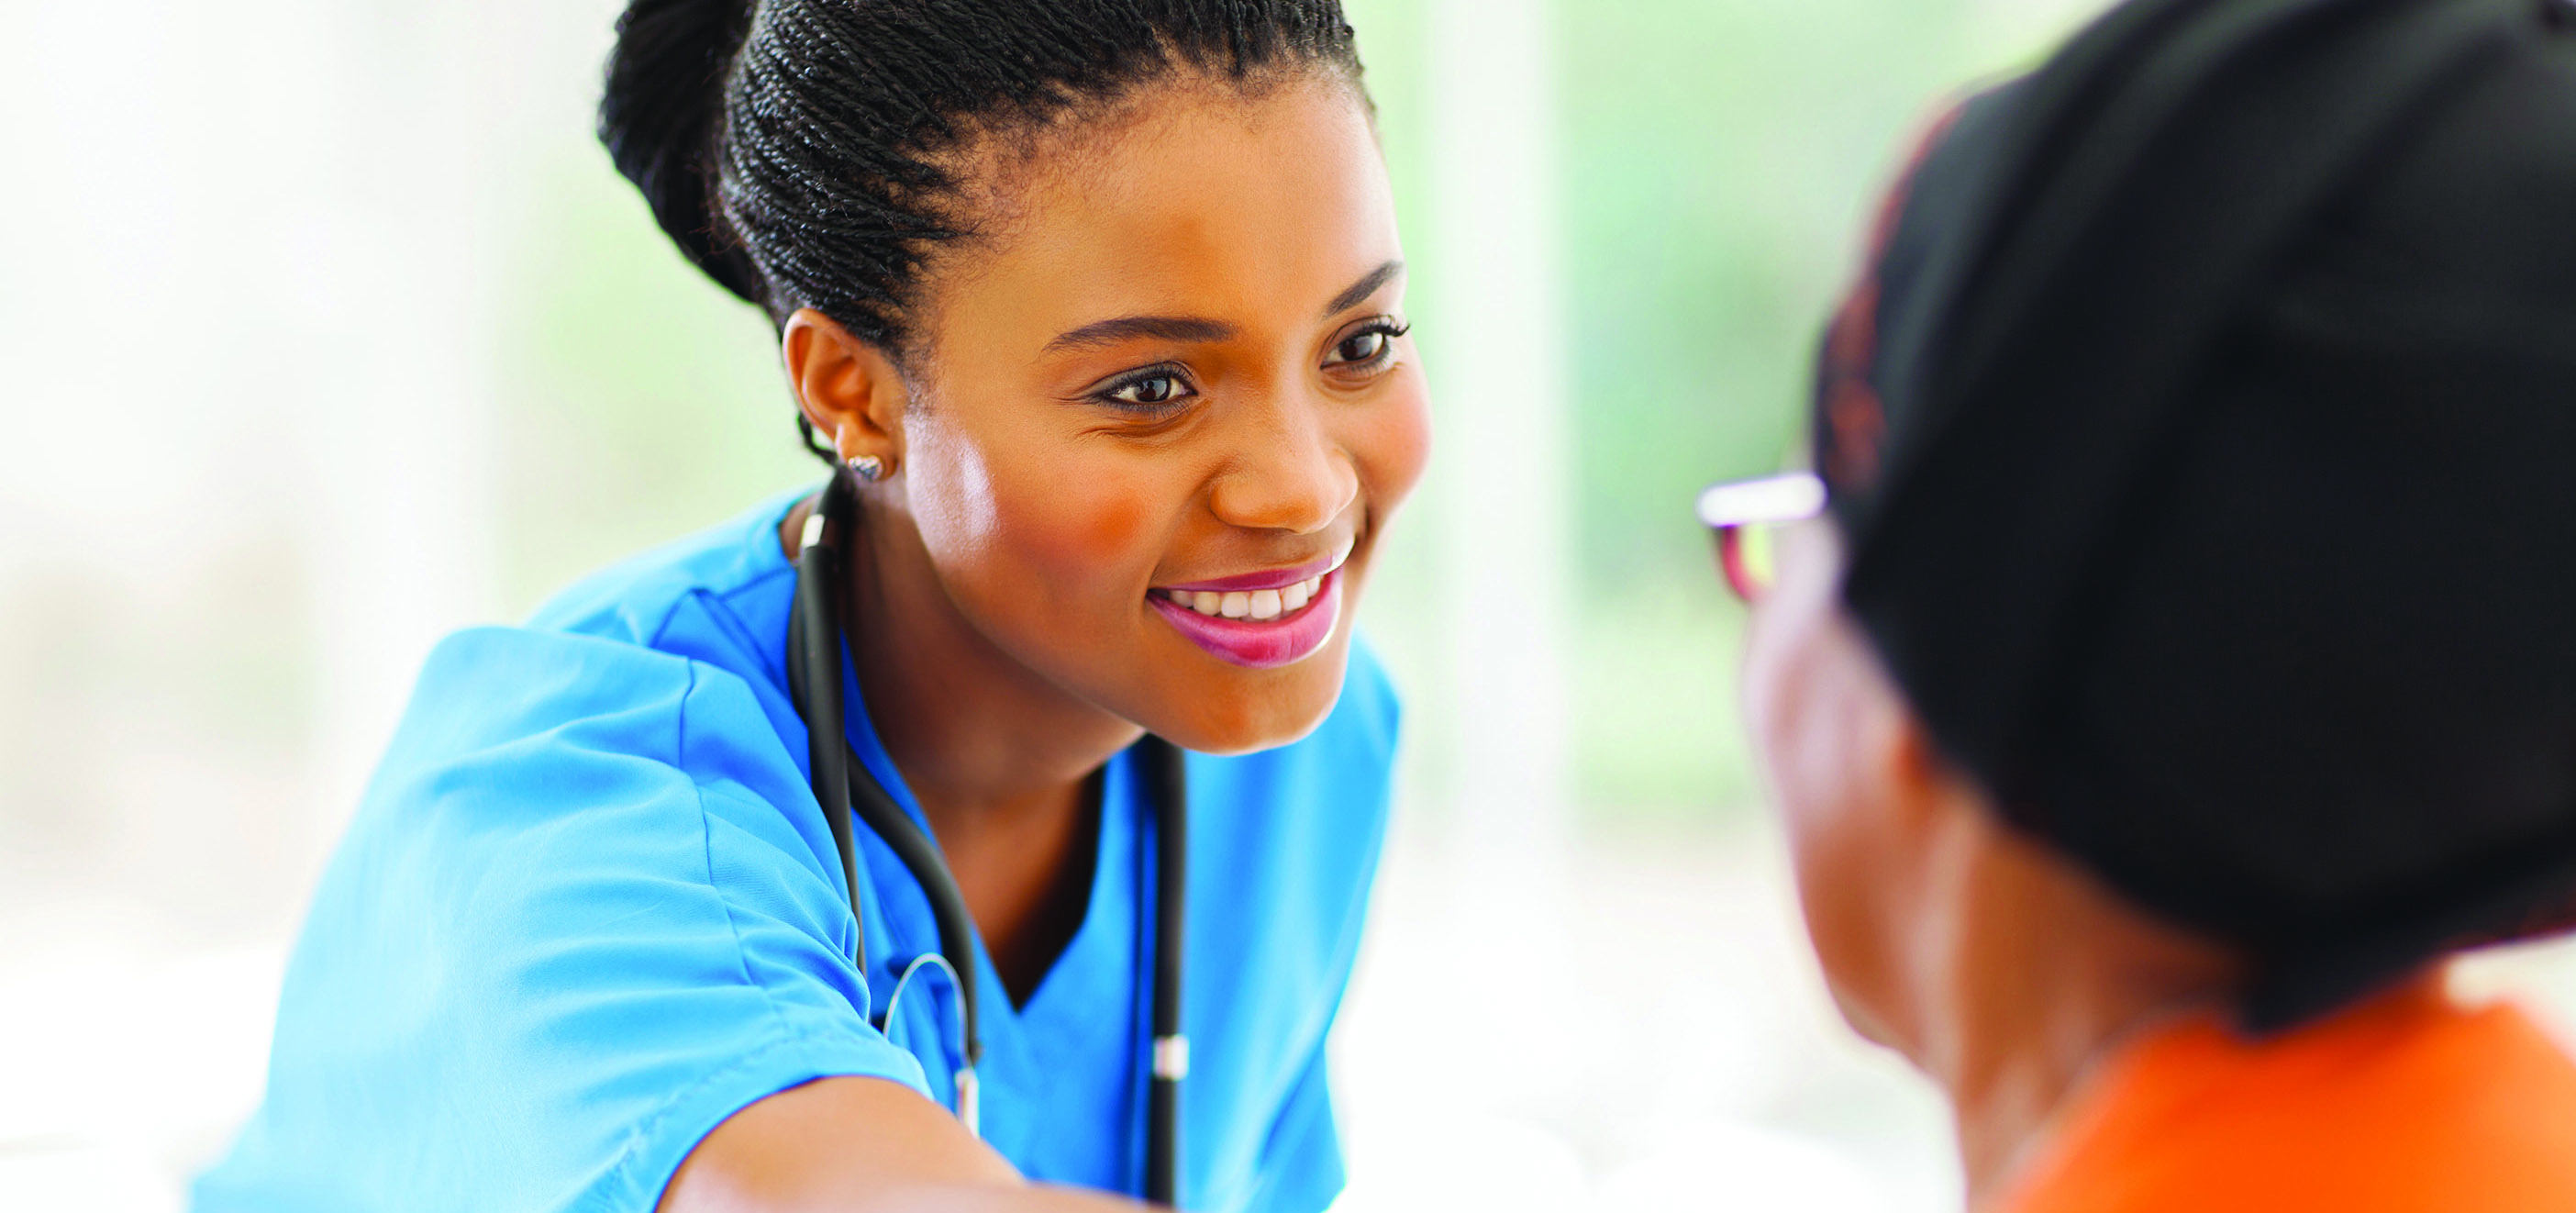 What Is a Certified Nursing Assistant (CNA) in the USA?